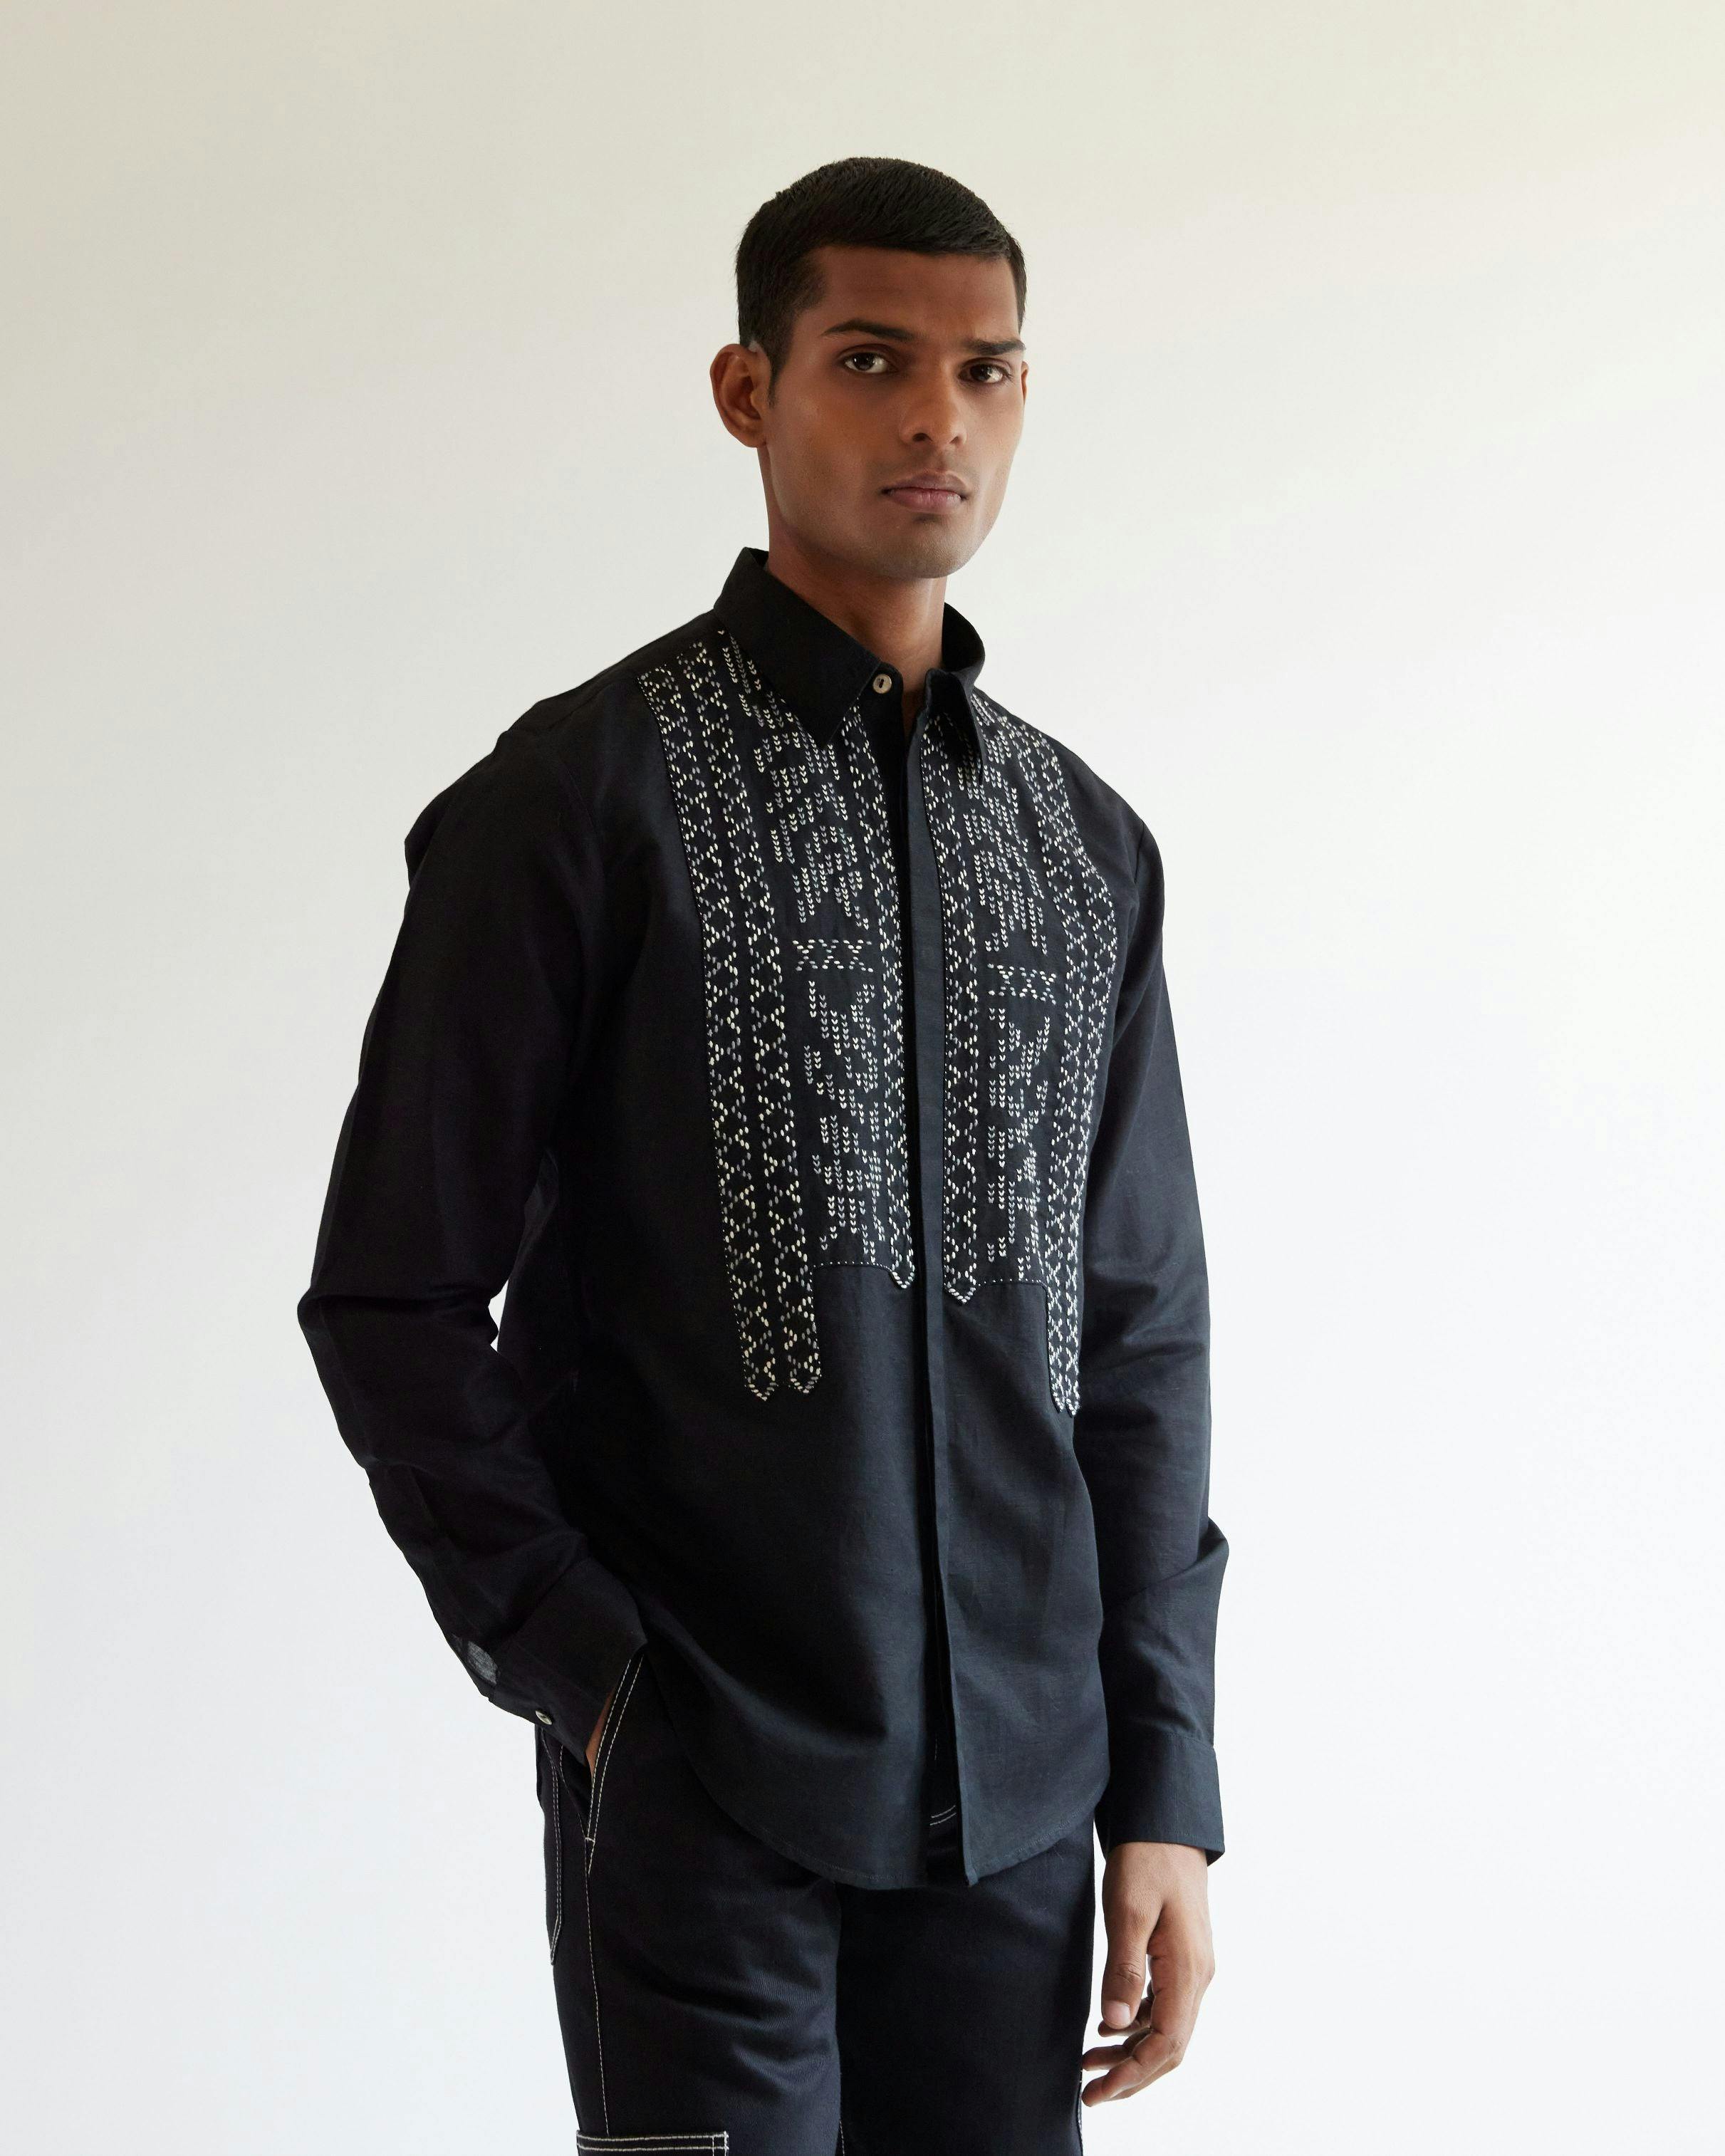 Asymmetric Yoke Shirt, a product by Country Made